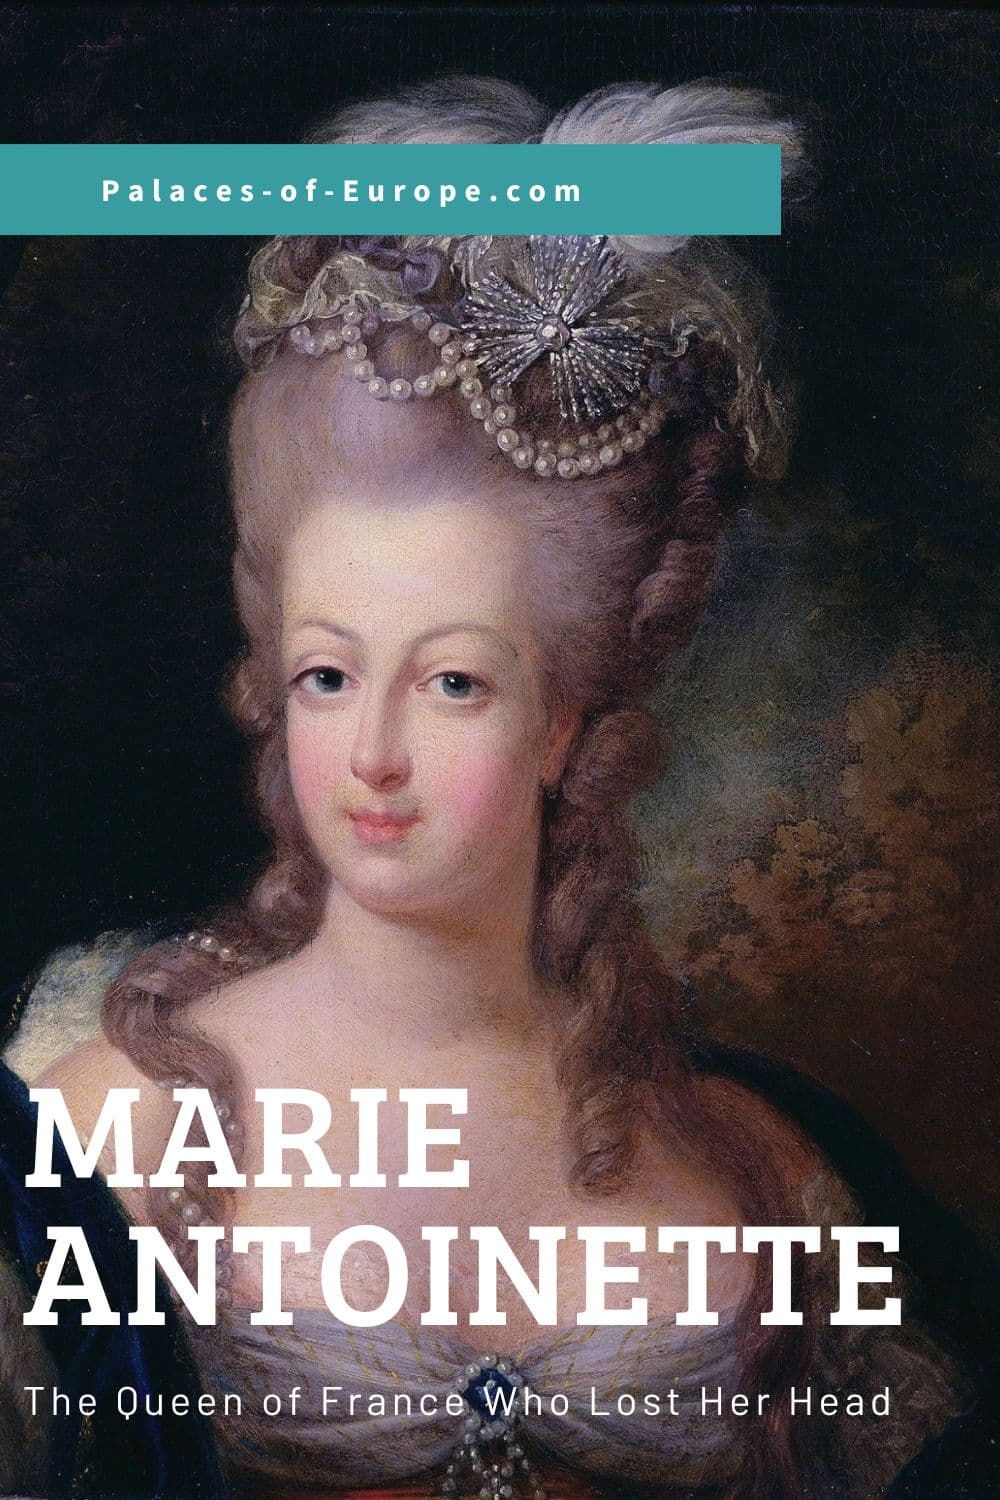 Marie Antoinette, born as Archduchess Maria Antonia, married the Dauphin of France (Louis XVI) at the age of 15.